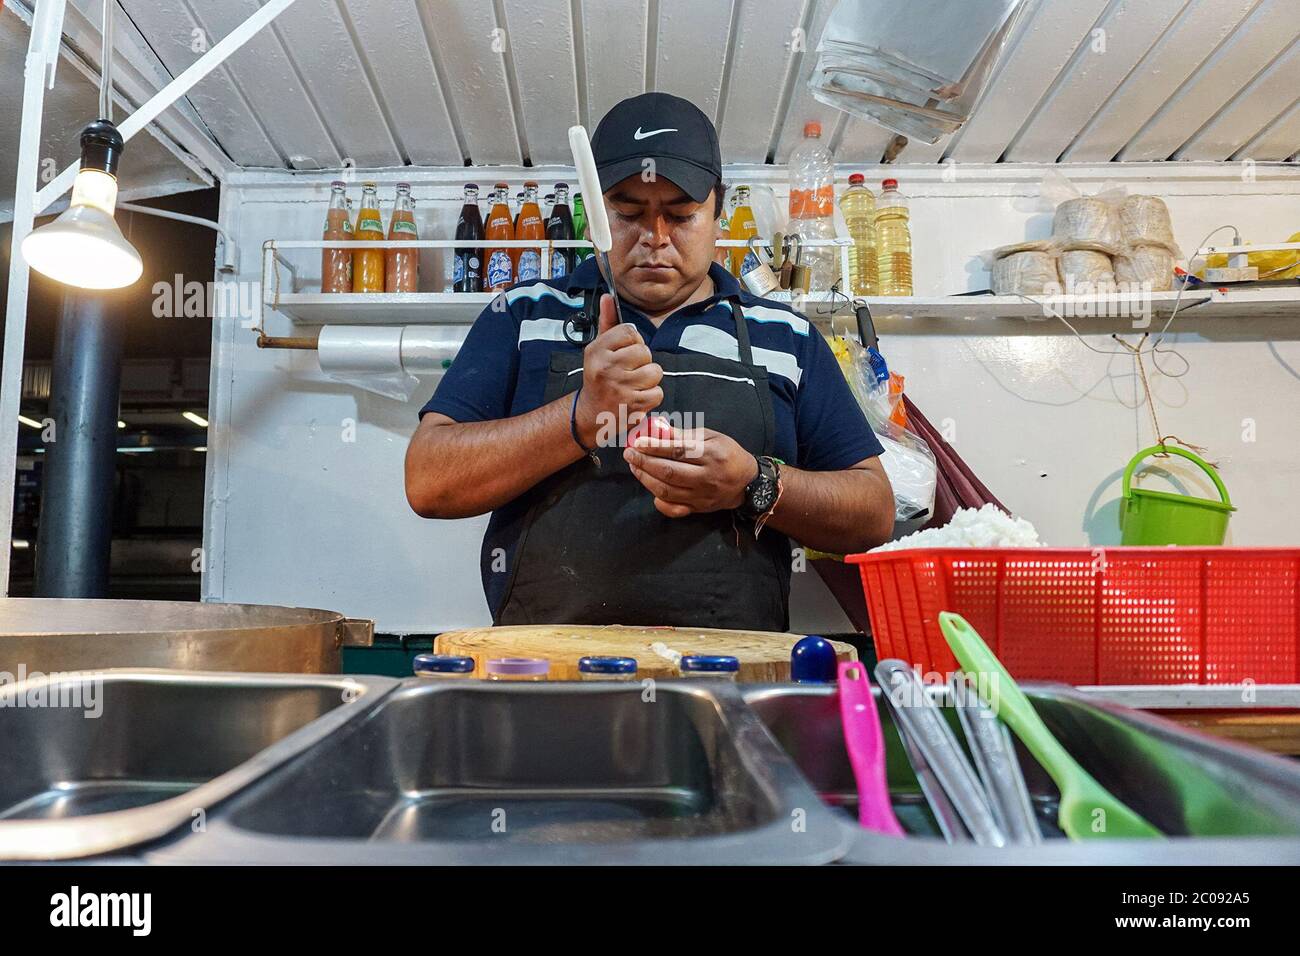 Miguel Ángel Xochicale chops vegetables for salsa early in the morning at a taco stand in Colonia Albert, Mexico City. The taco stand is open 24 hours a day and is located outside the Portales metro stop, which keeps customers coming at all hours. (Mayela Sánchez, GPJ Mexico) Stock Photo